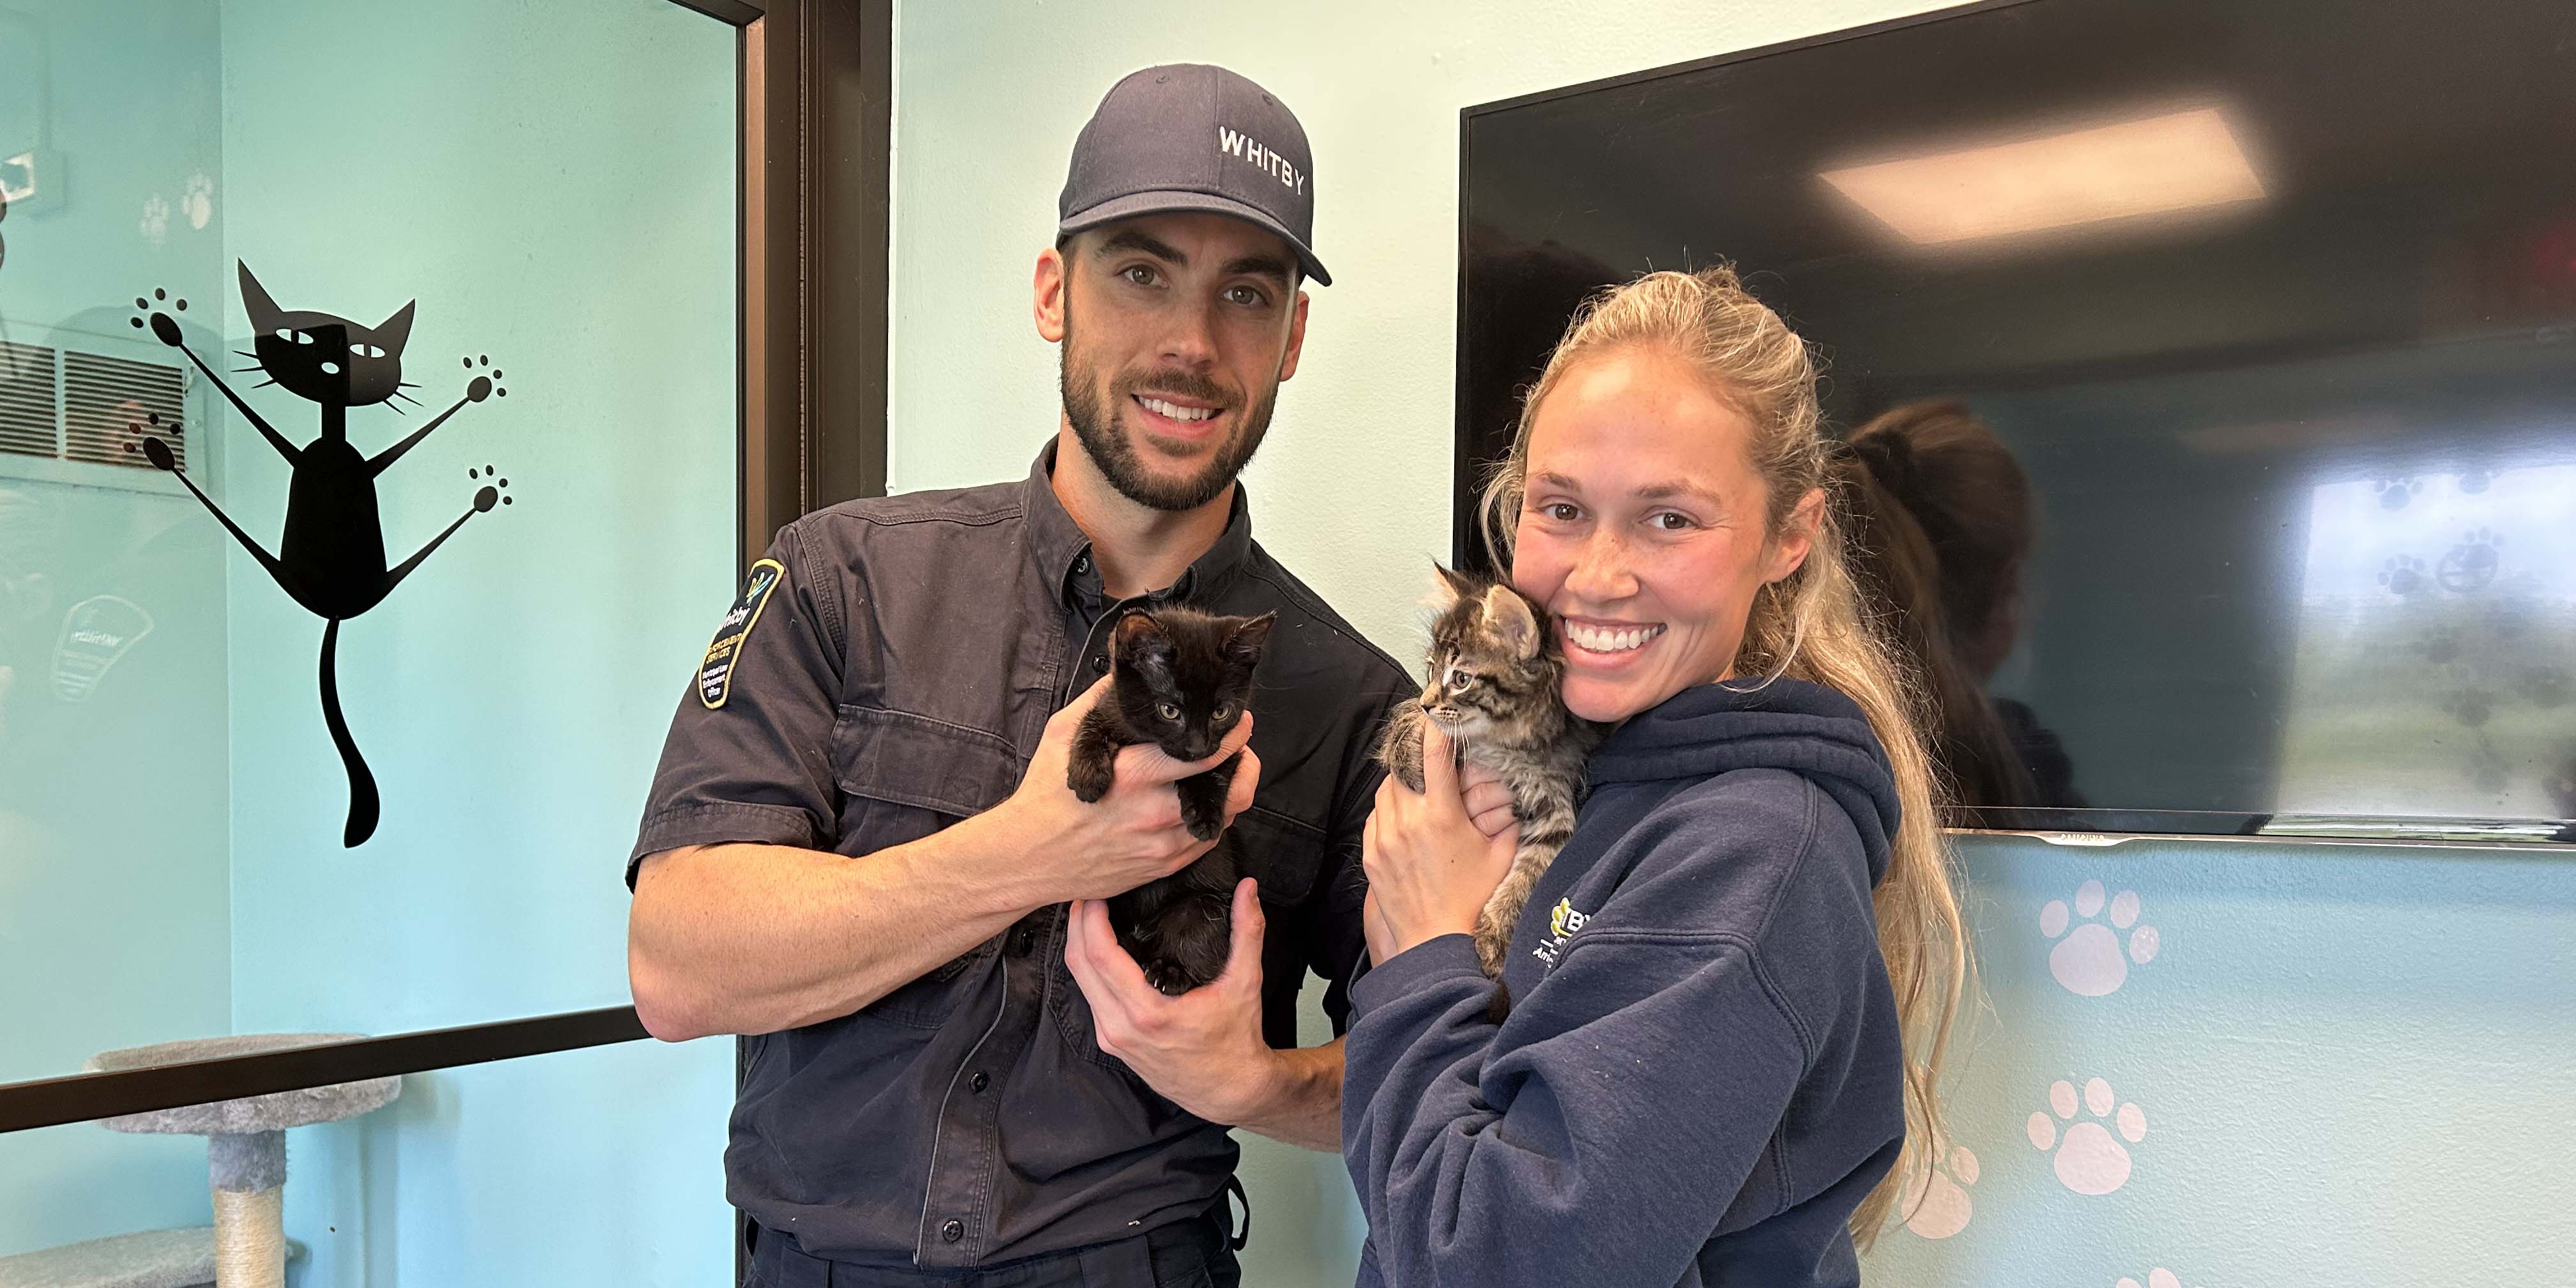 Whitby Animal Services Officers holding kittens.